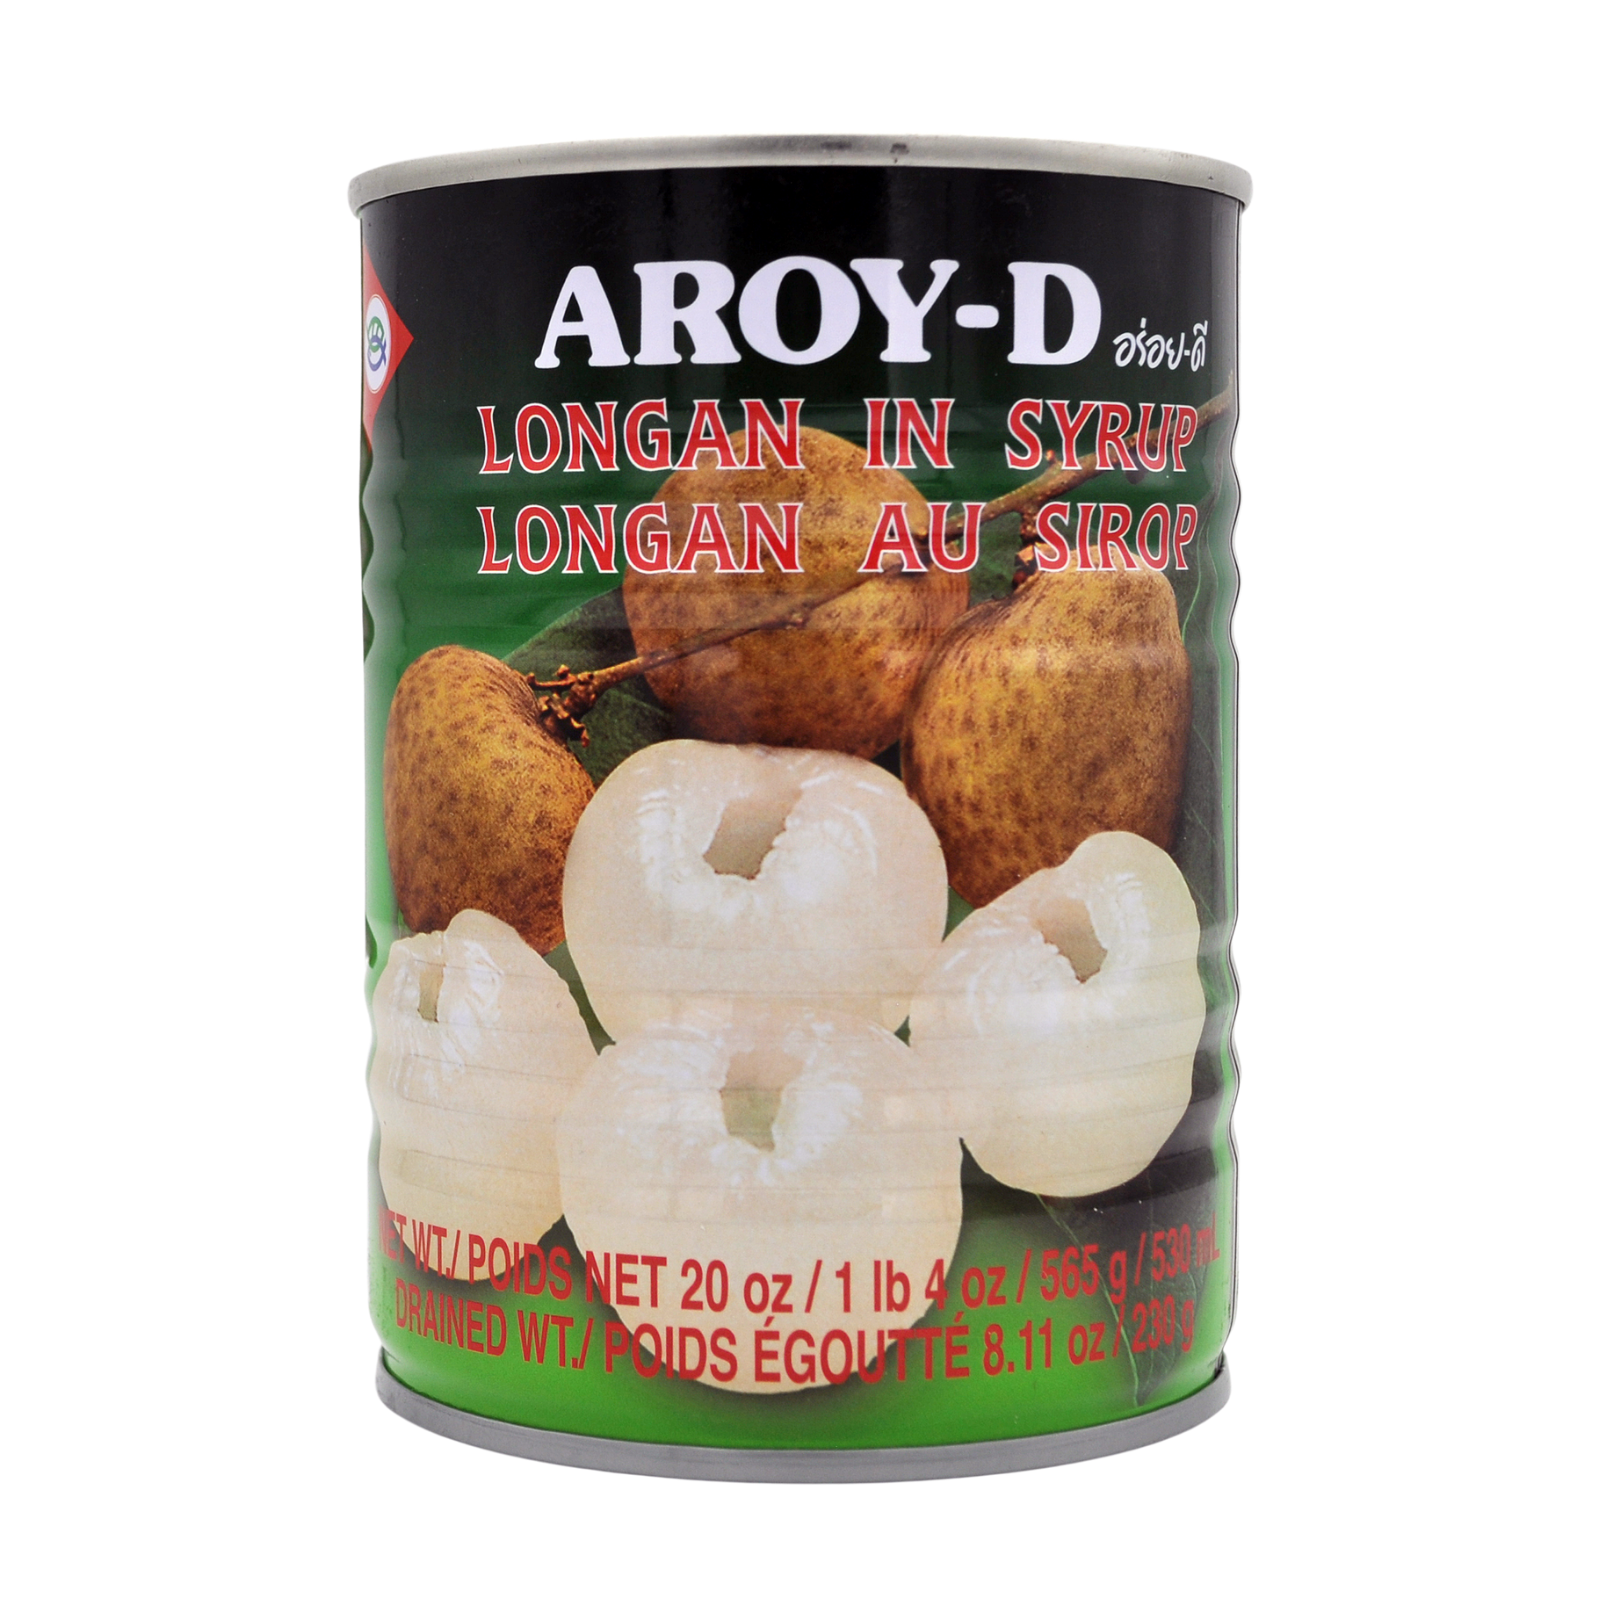 Thai Longan in Syrup (565g can) by Aroy-D